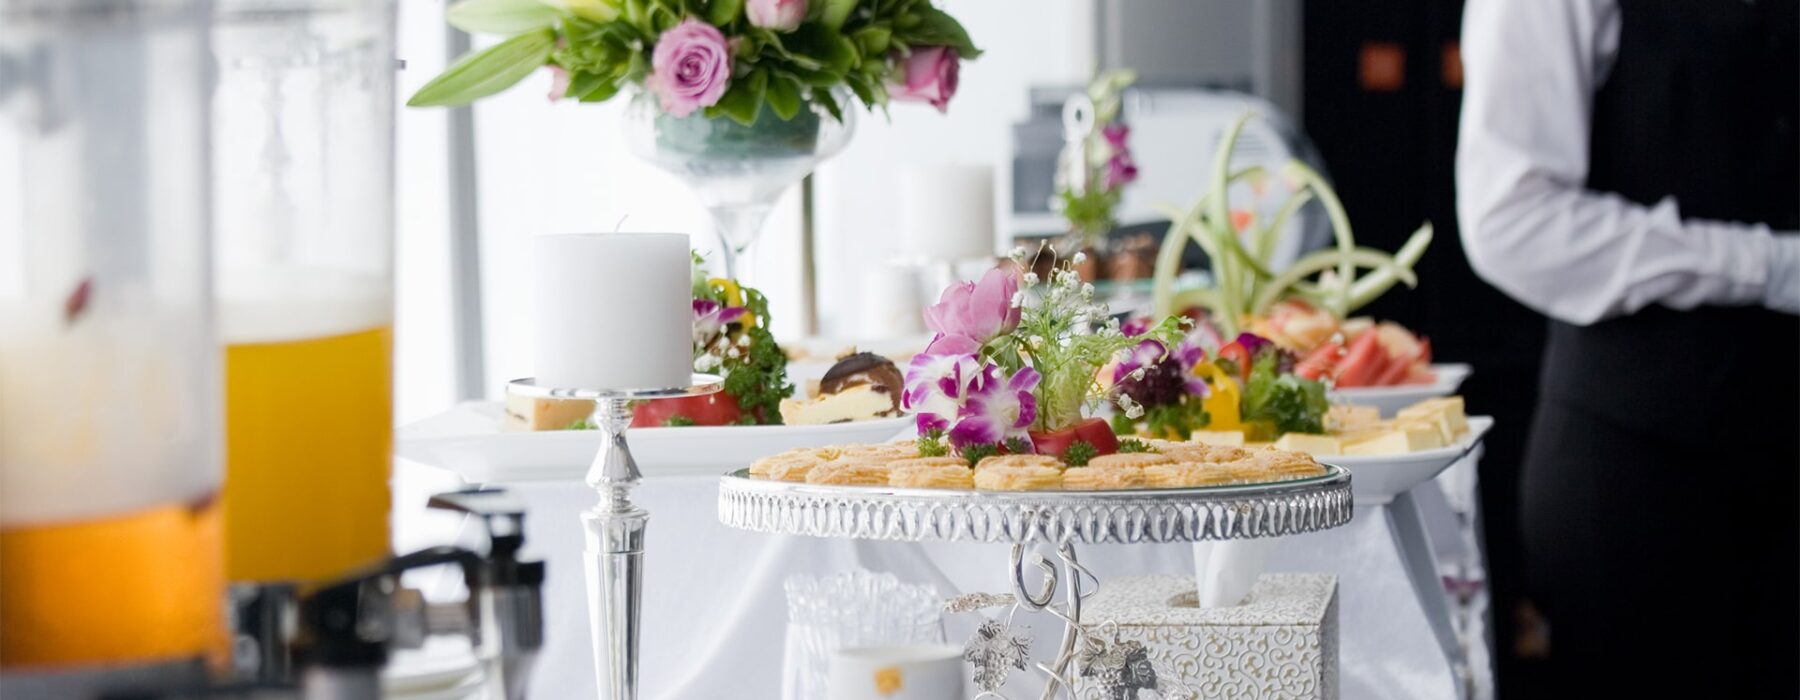 Creative and Inclusive Wedding Catering Menus for All Dietary Needs